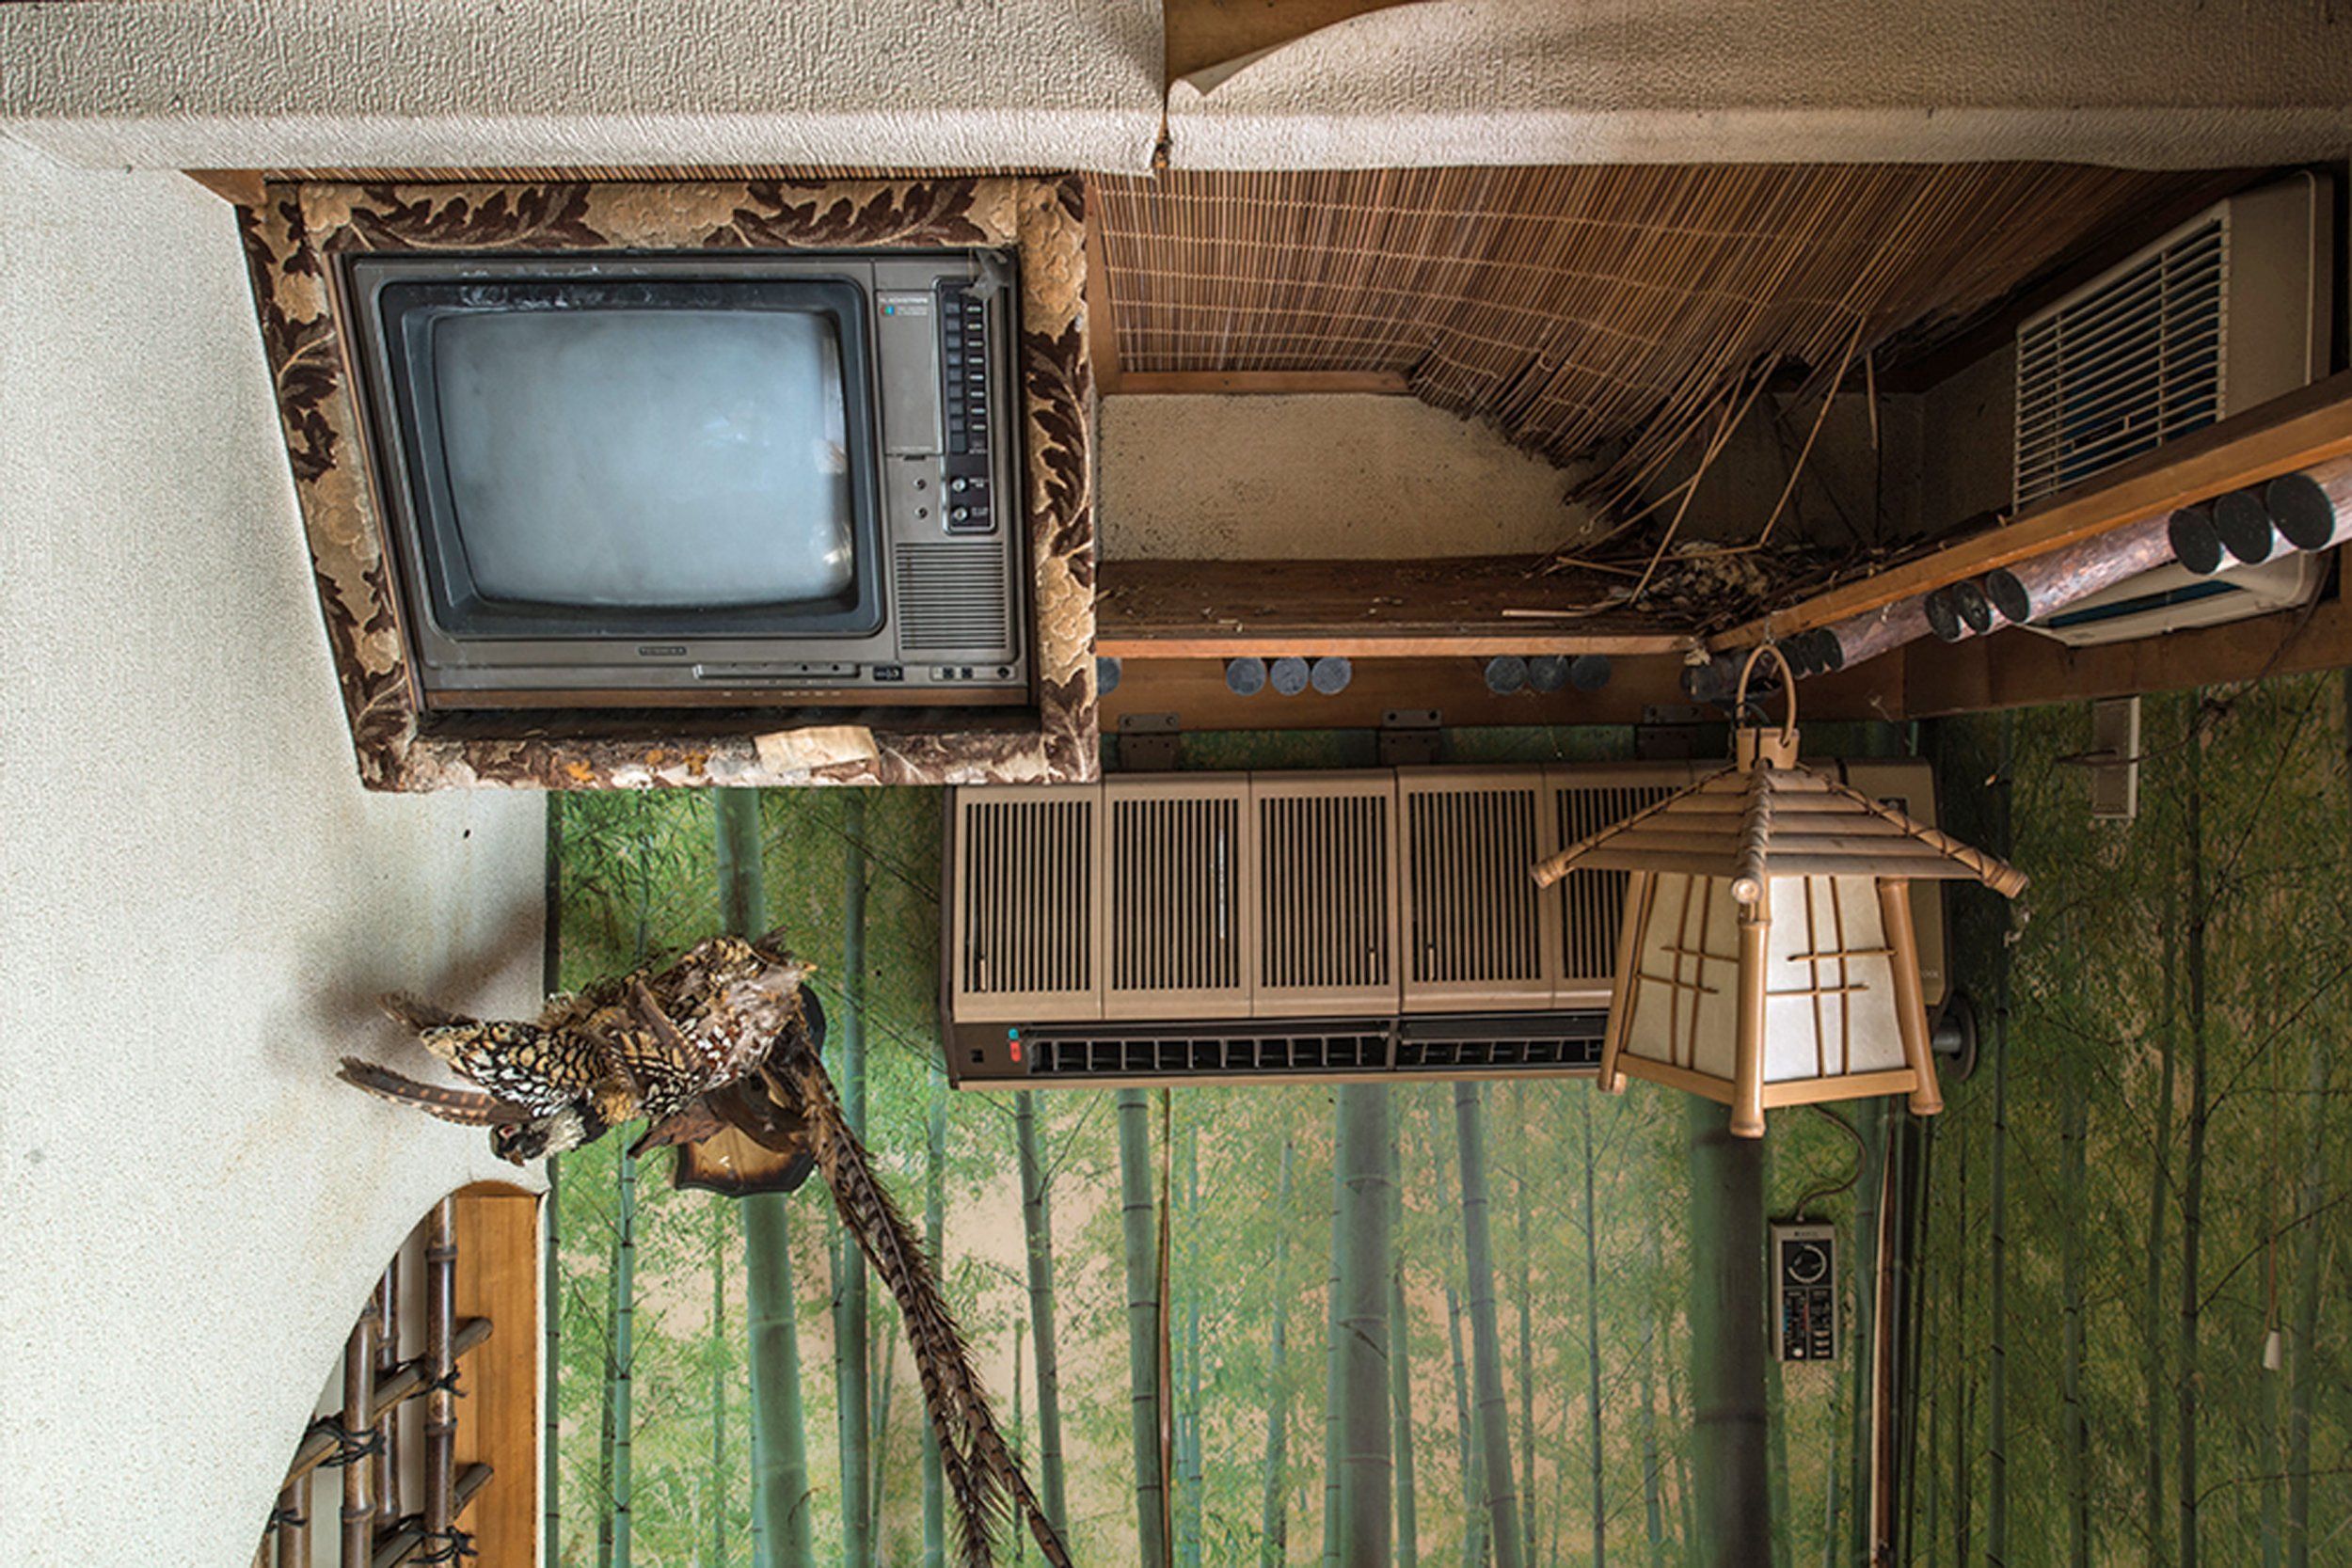 Pictured, a traditional lamp hangs off a top shelf in a room, next to a stuffed bird. Even though the suite is supposed to model a Japanese woodland scene, it features a TV and air conditioners.